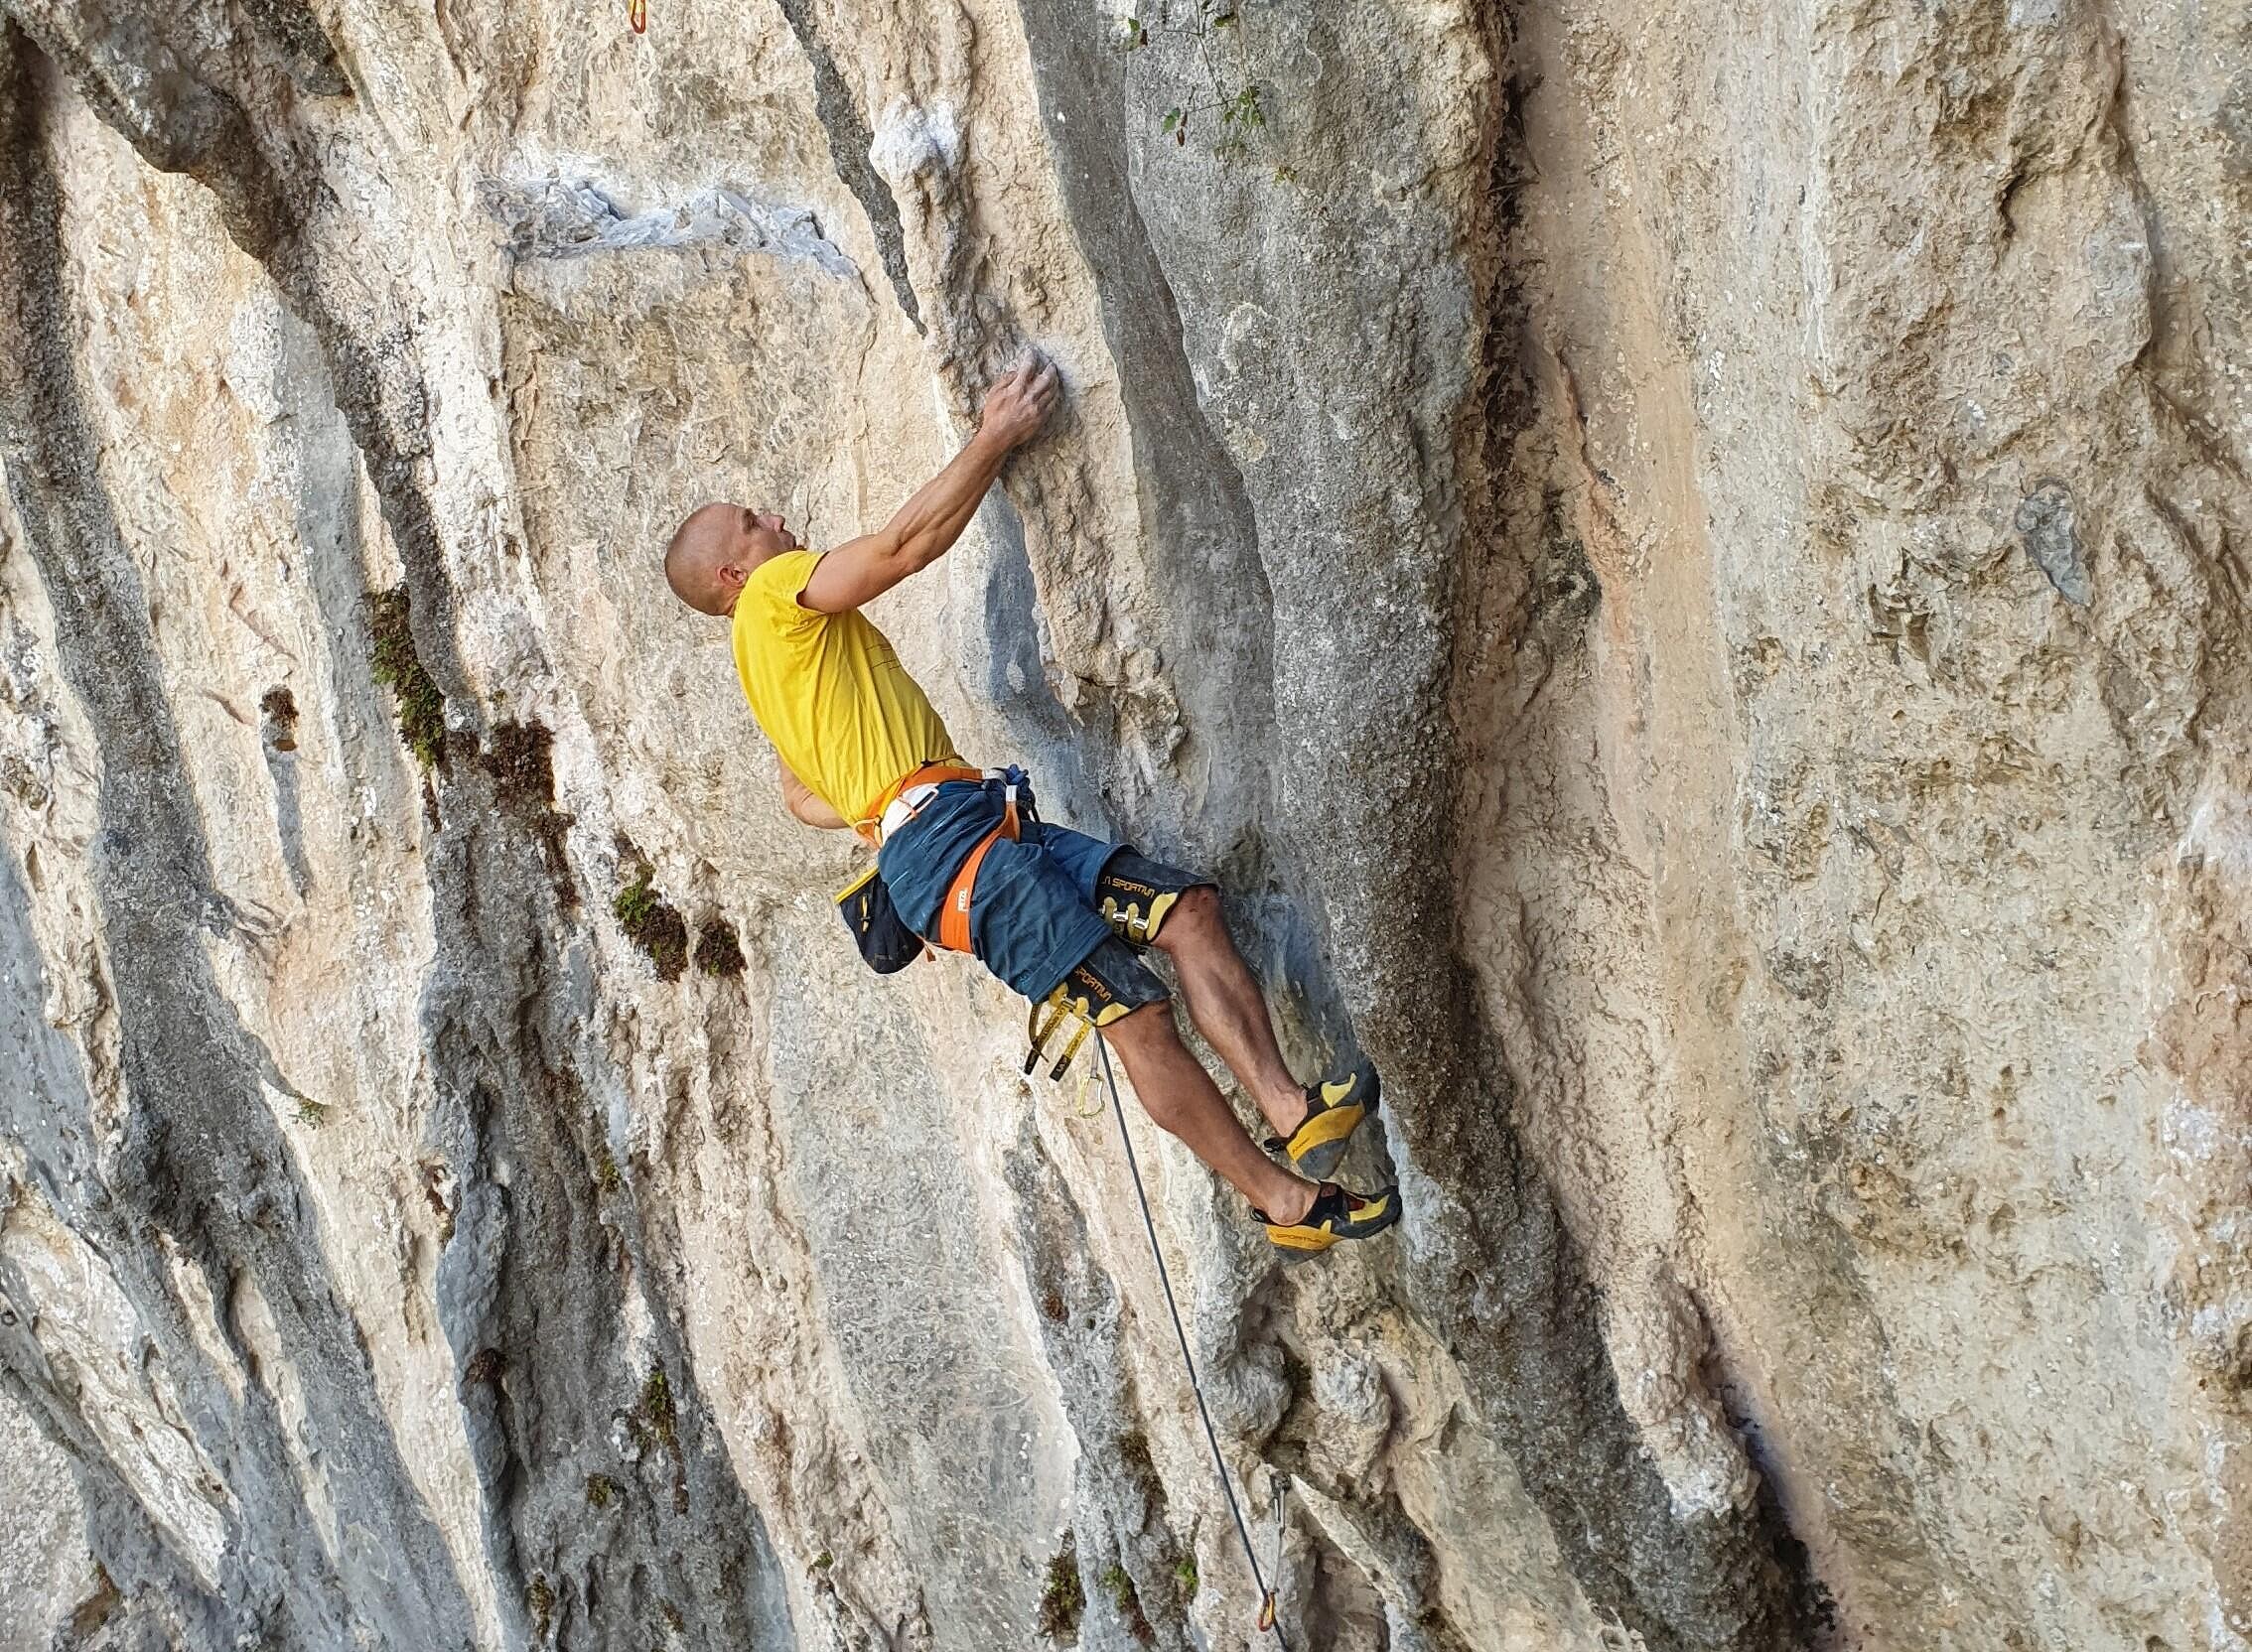 Neil staying calm on a tough, tufa test-piece at Rumenes.  © Fraser